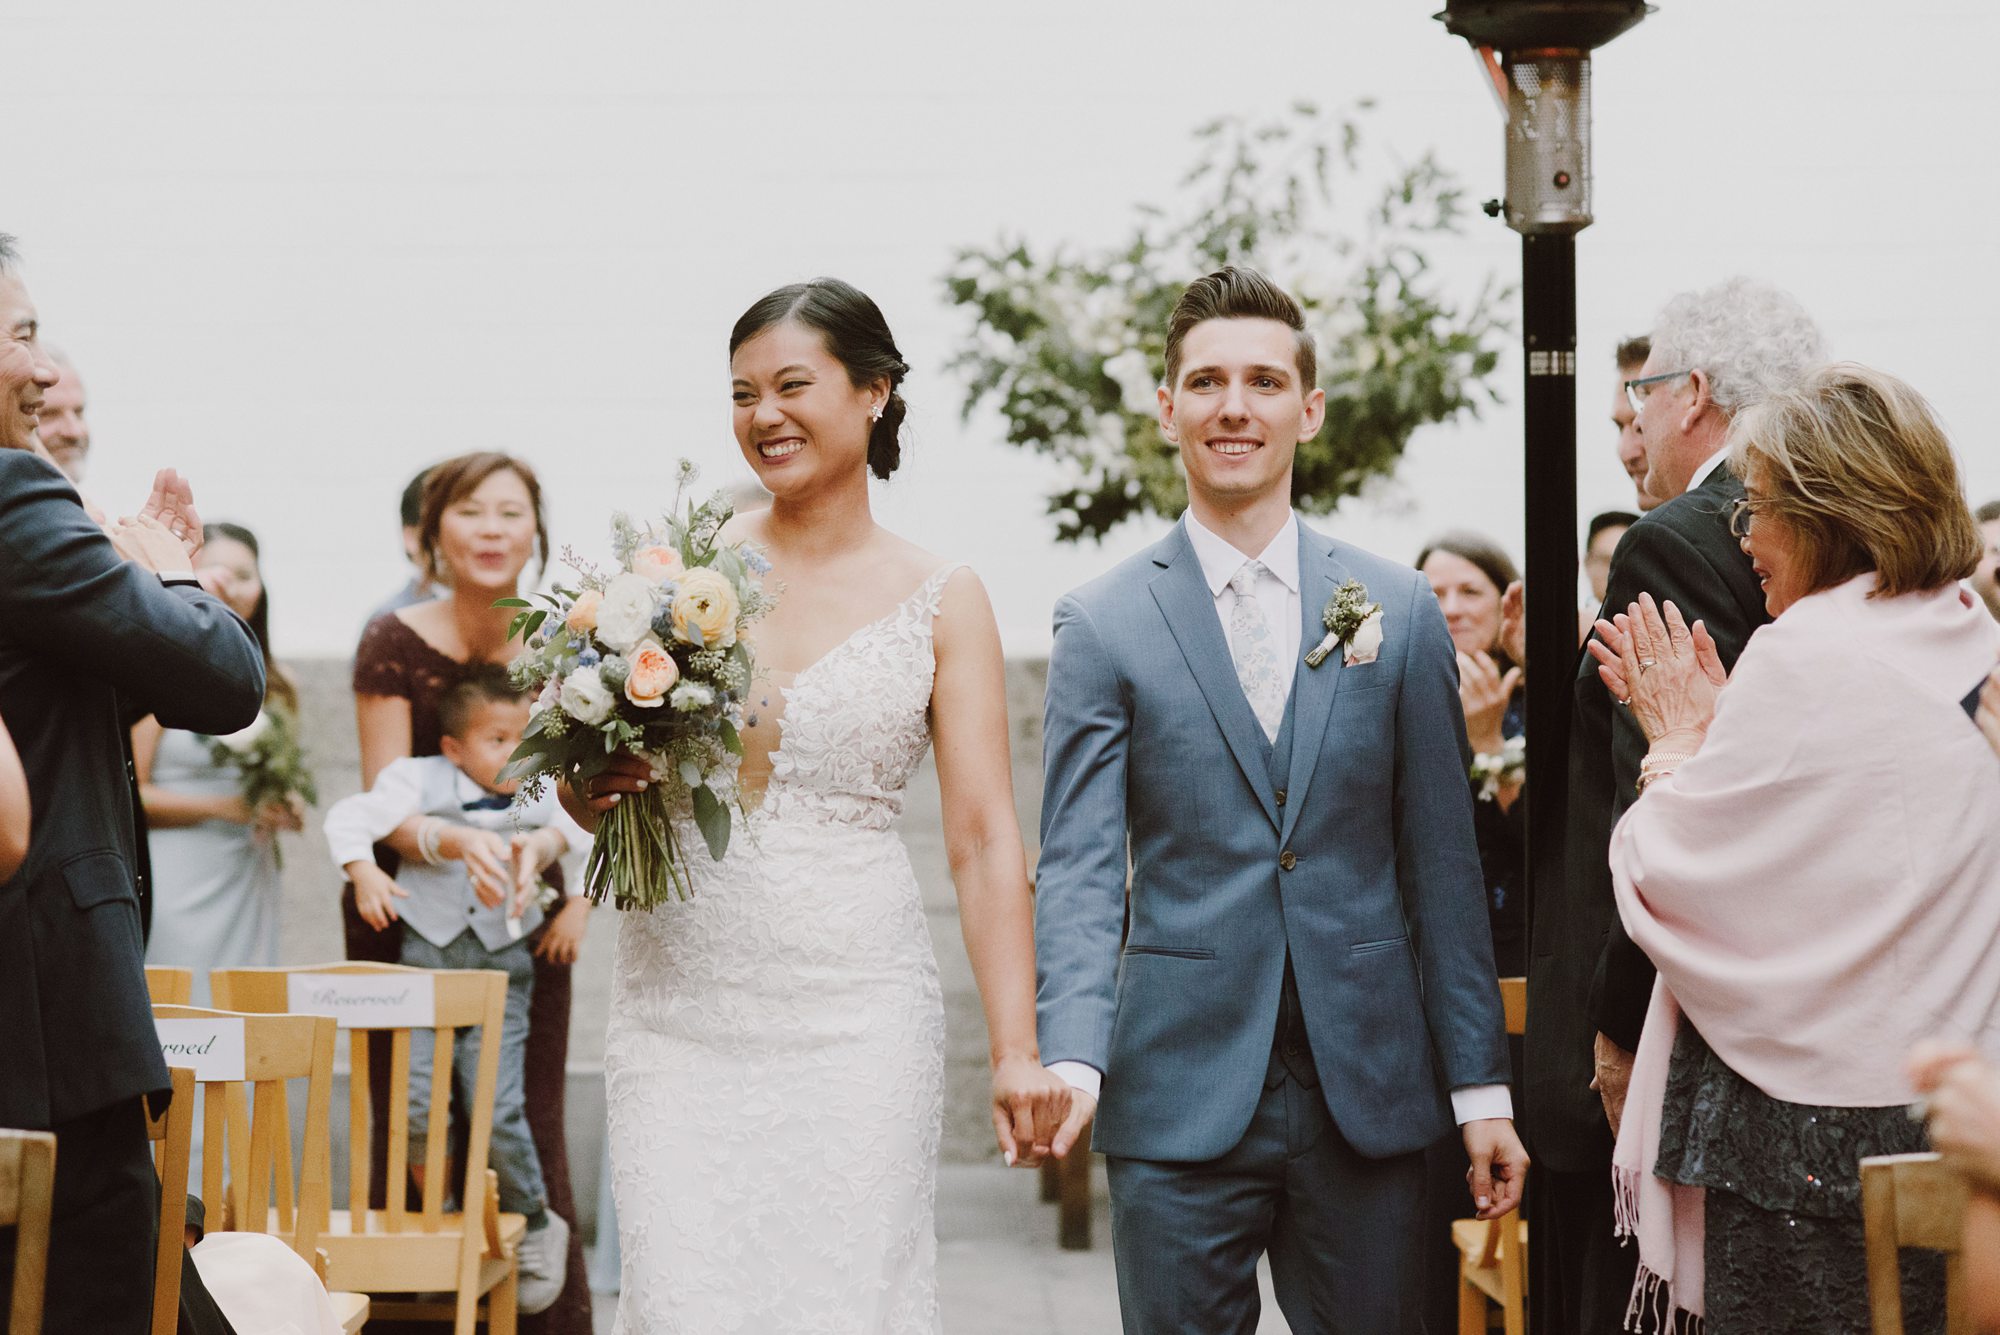 Bride and Groom walking down the aisle together | San Francisco Wedding Photographer